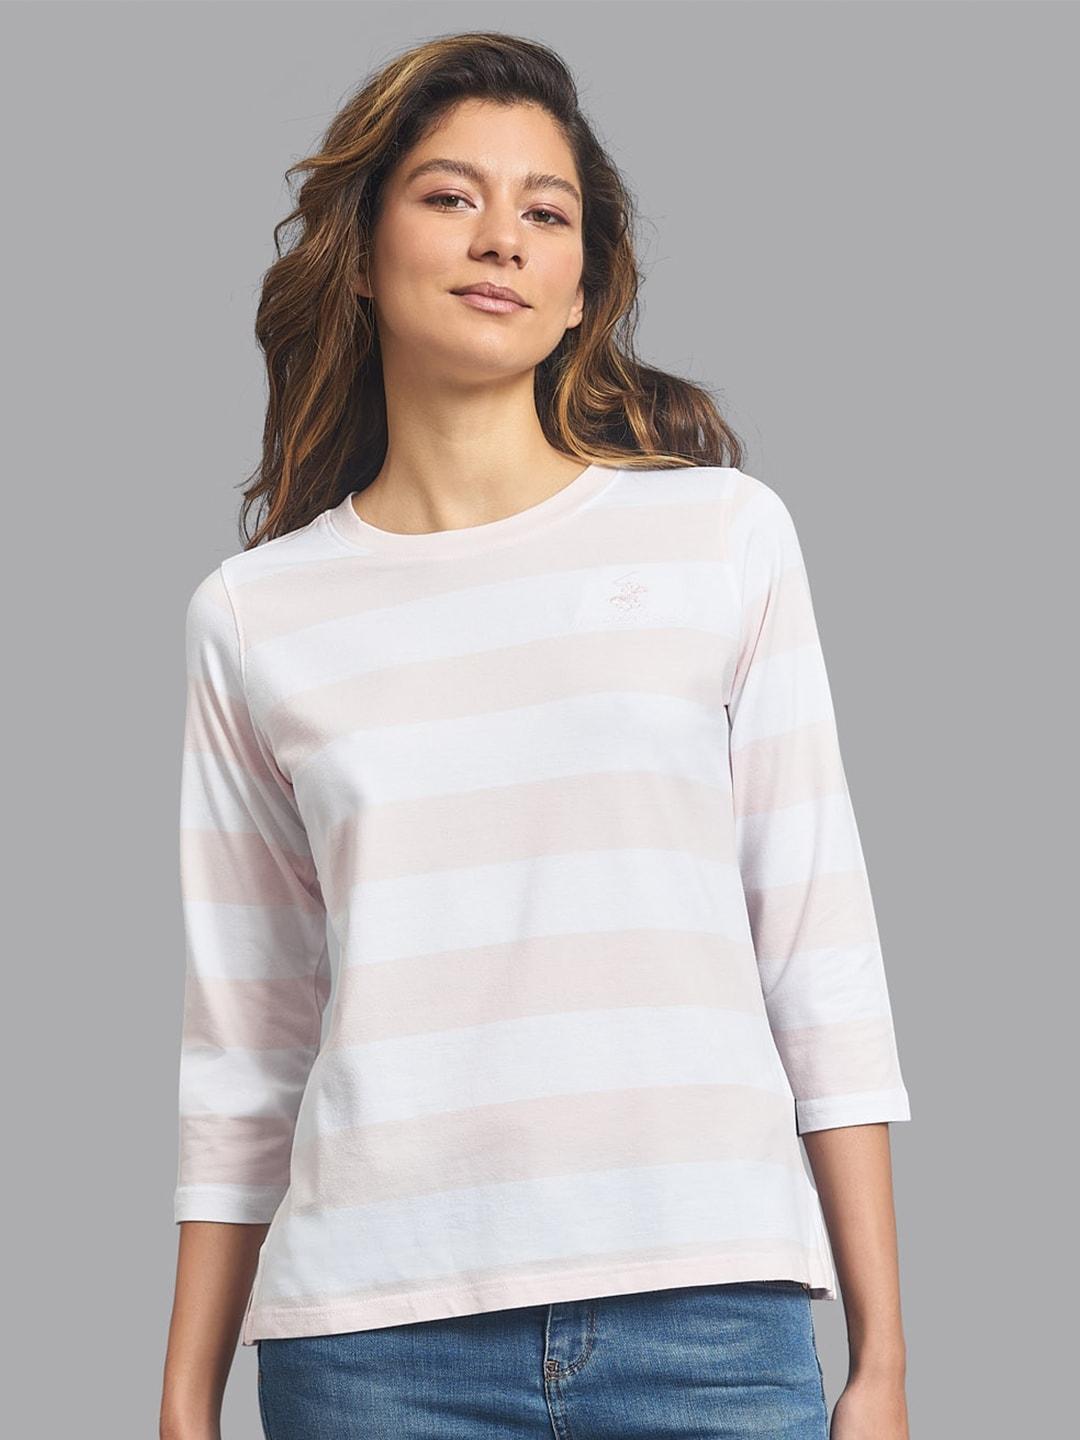 Beverly Hills Polo Club Women Multicoloured Striped T-shirt